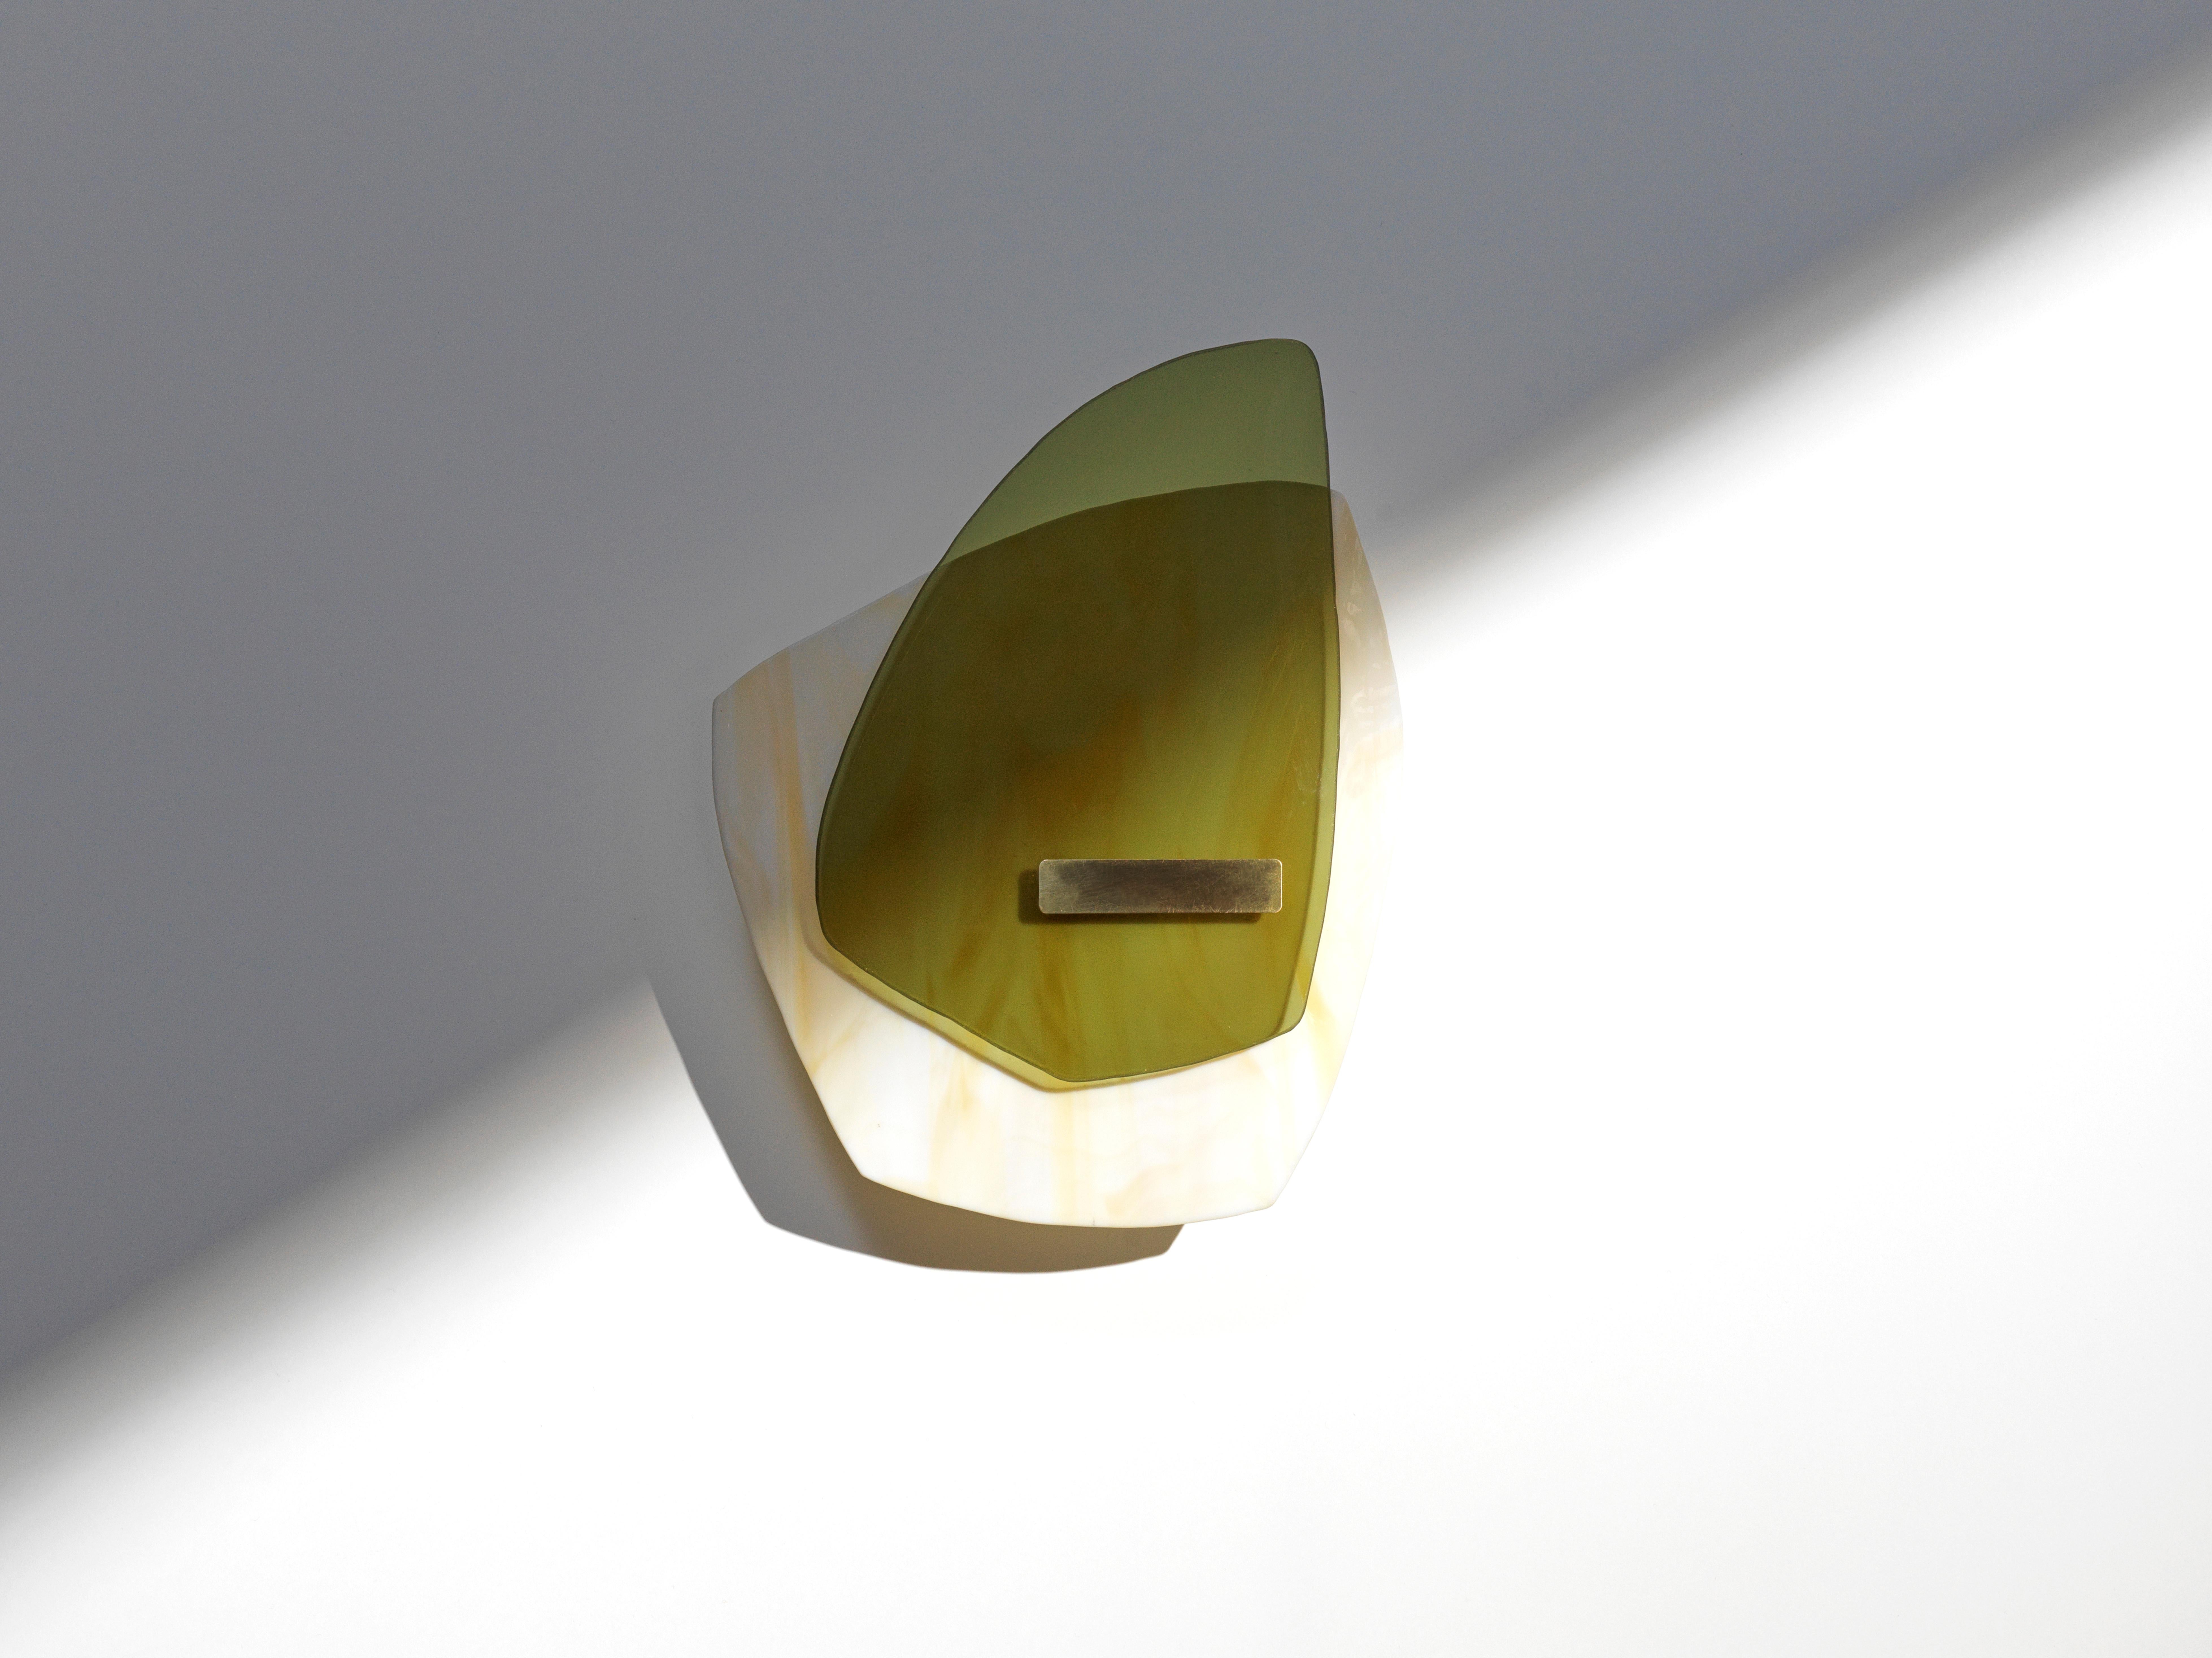 Alliance 03 light sculpture by Marie Jeunet.
Dimensions: H 35 x L 26 cm
Materials: Semi opaque ochre marbled glass, smooth olive green glass sheet, brushed brass structure and finish

Les Precieux 
These luminous sculptures evolve with the